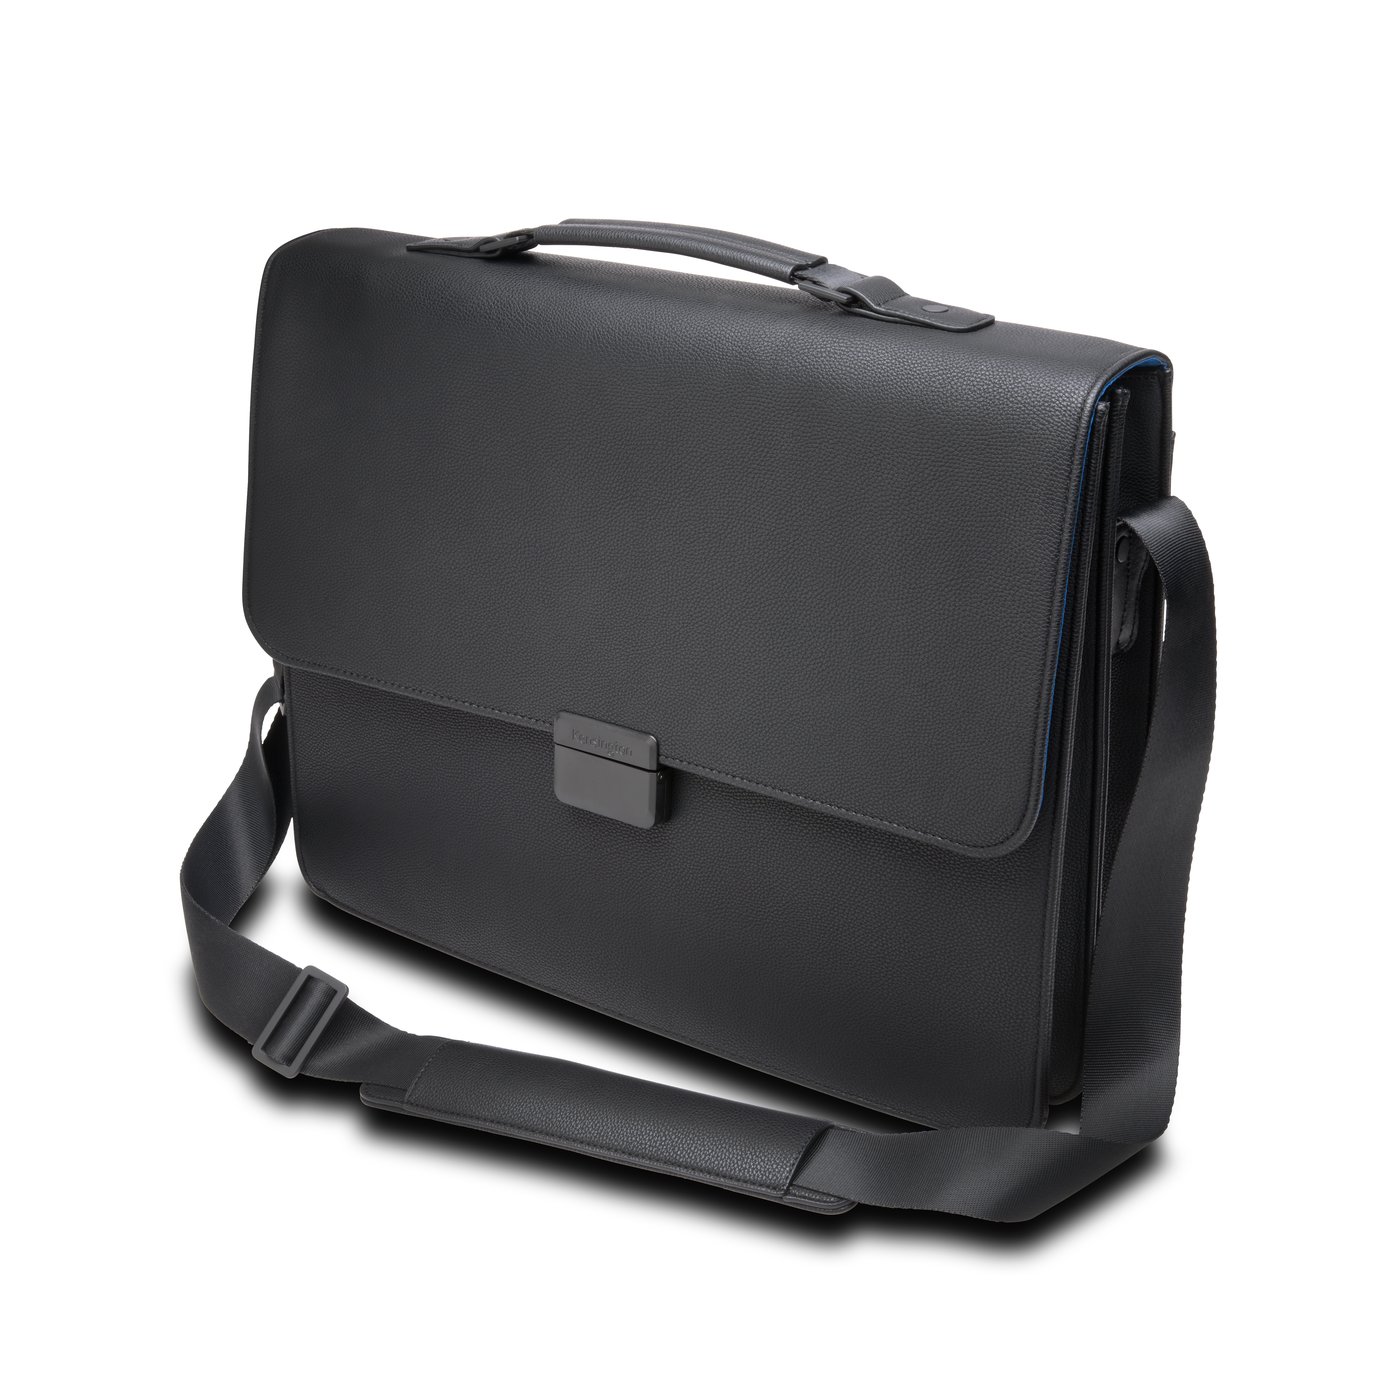 Kensington - Products - Laptop Bags - Briefcases / Totes - LM570 ...